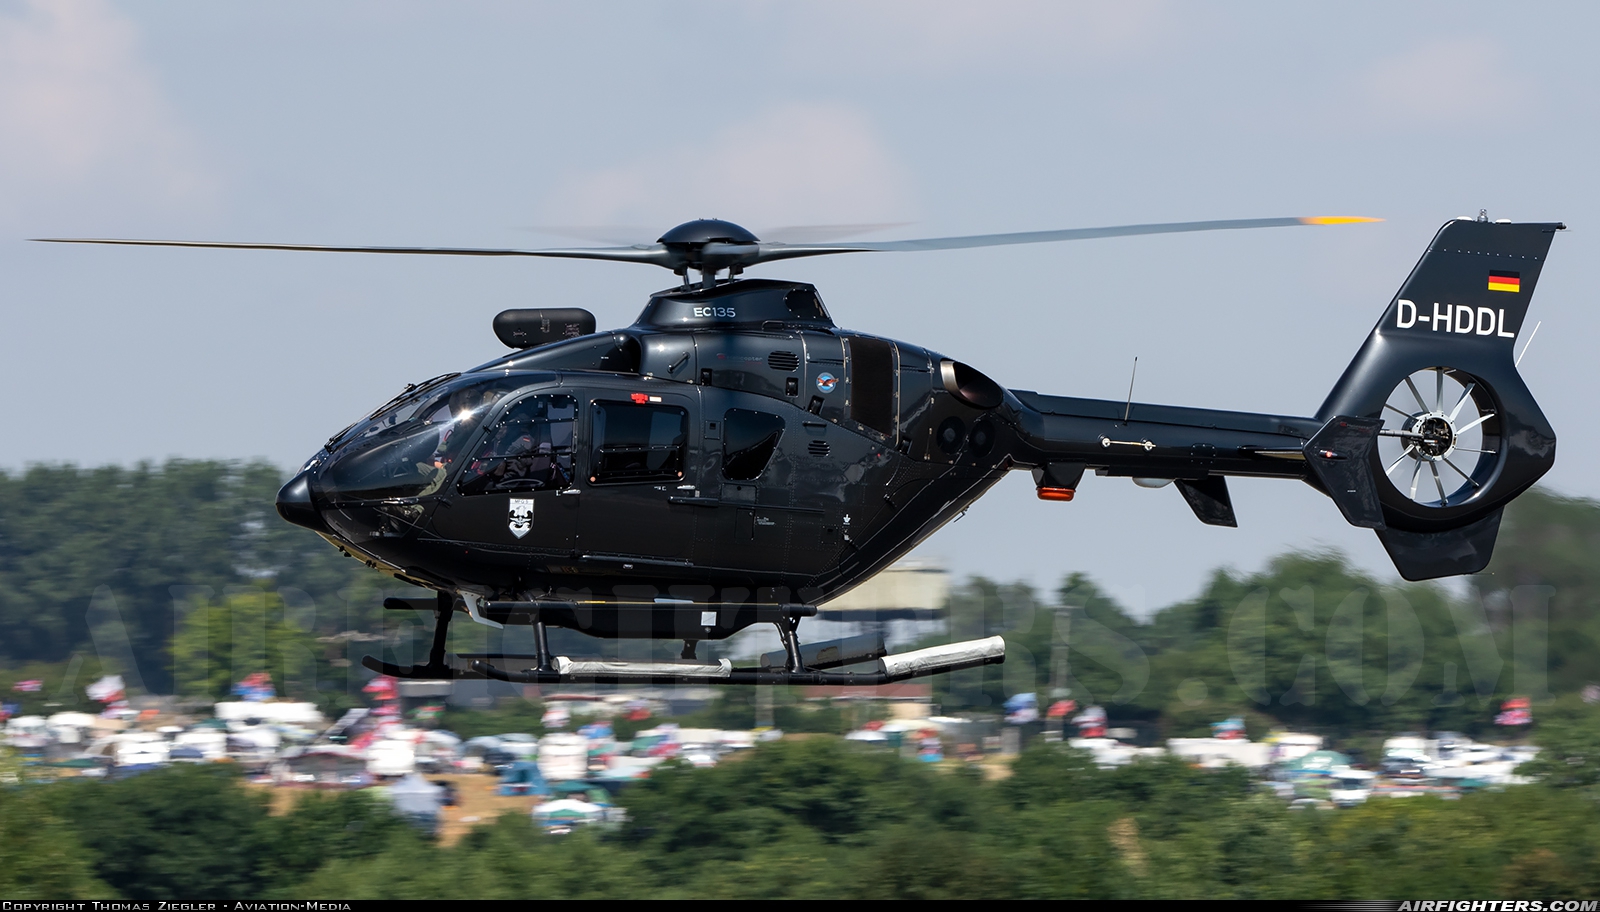 Germany - Navy Eurocopter EC-135P2 D-HDDL at Fairford (FFD / EGVA), UK